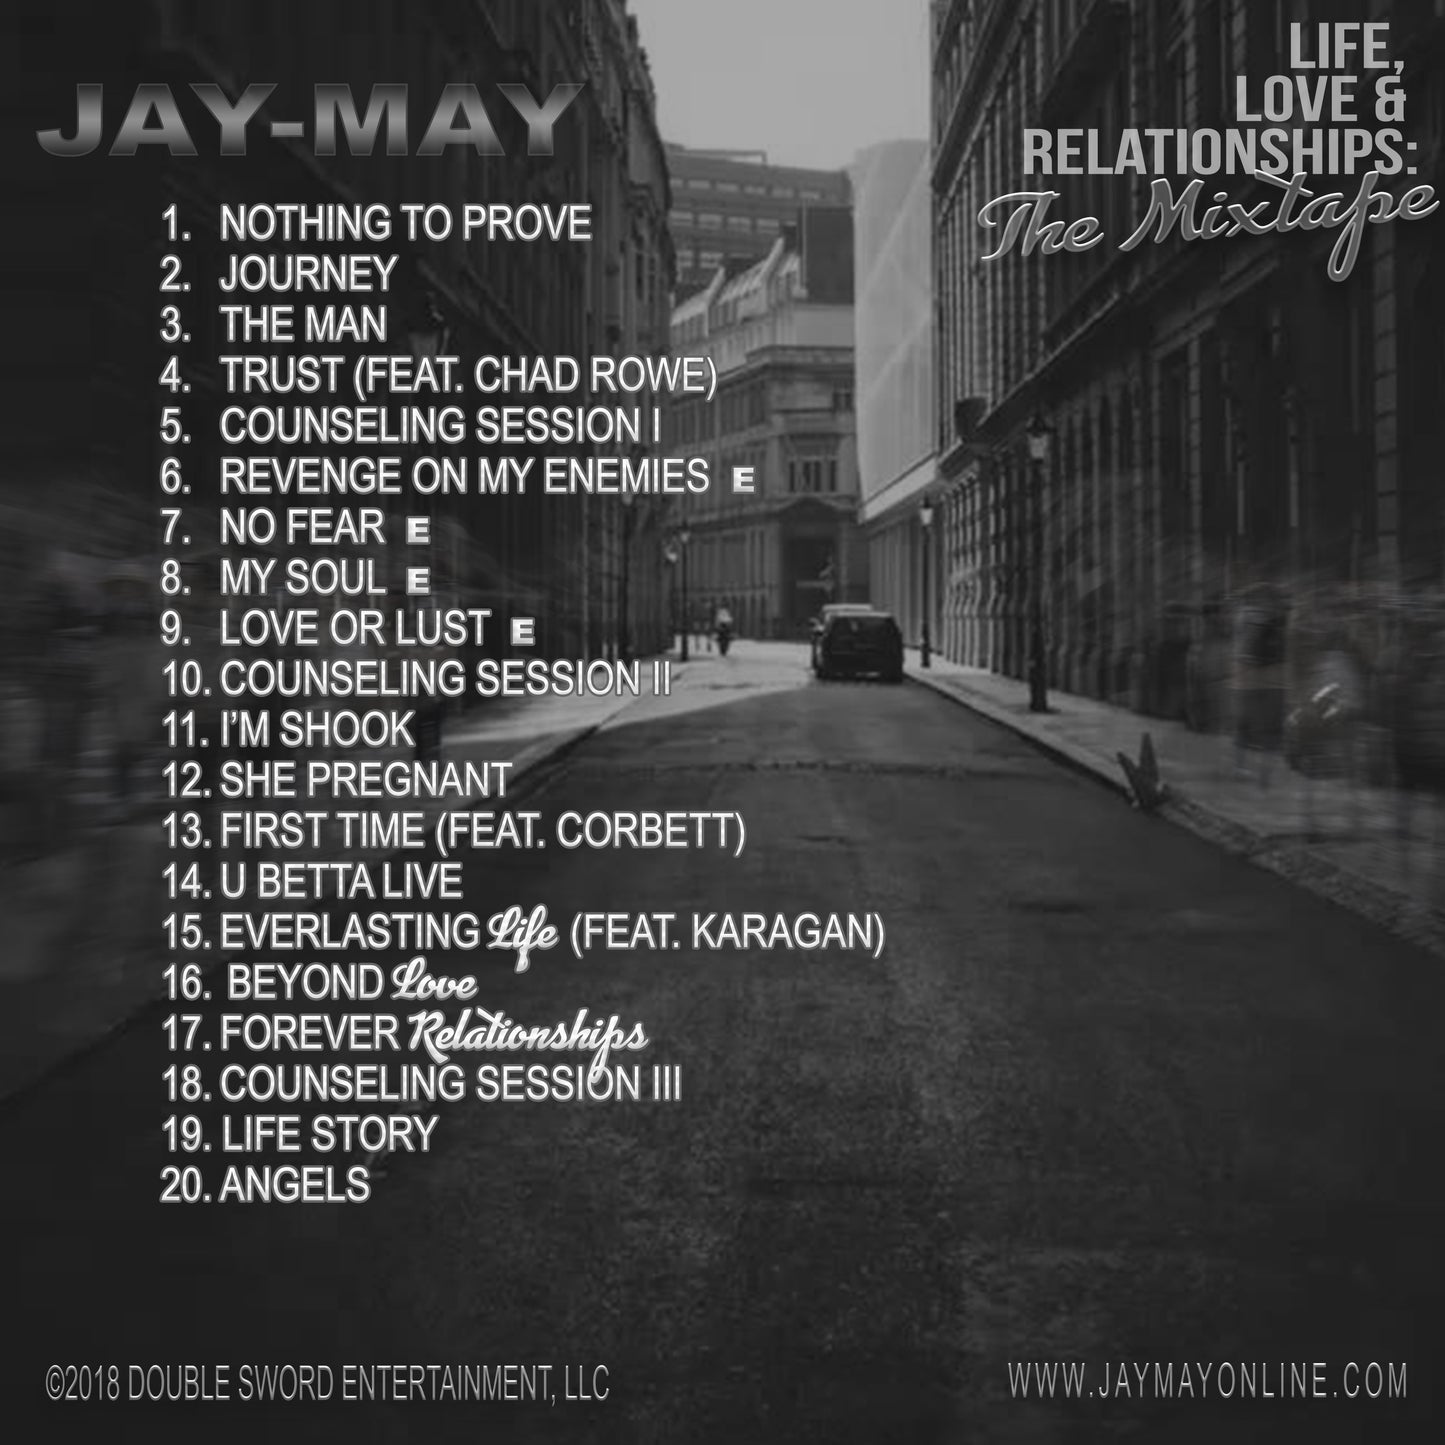 Life, Love & Relationship: The Mixtape (Physical CD)